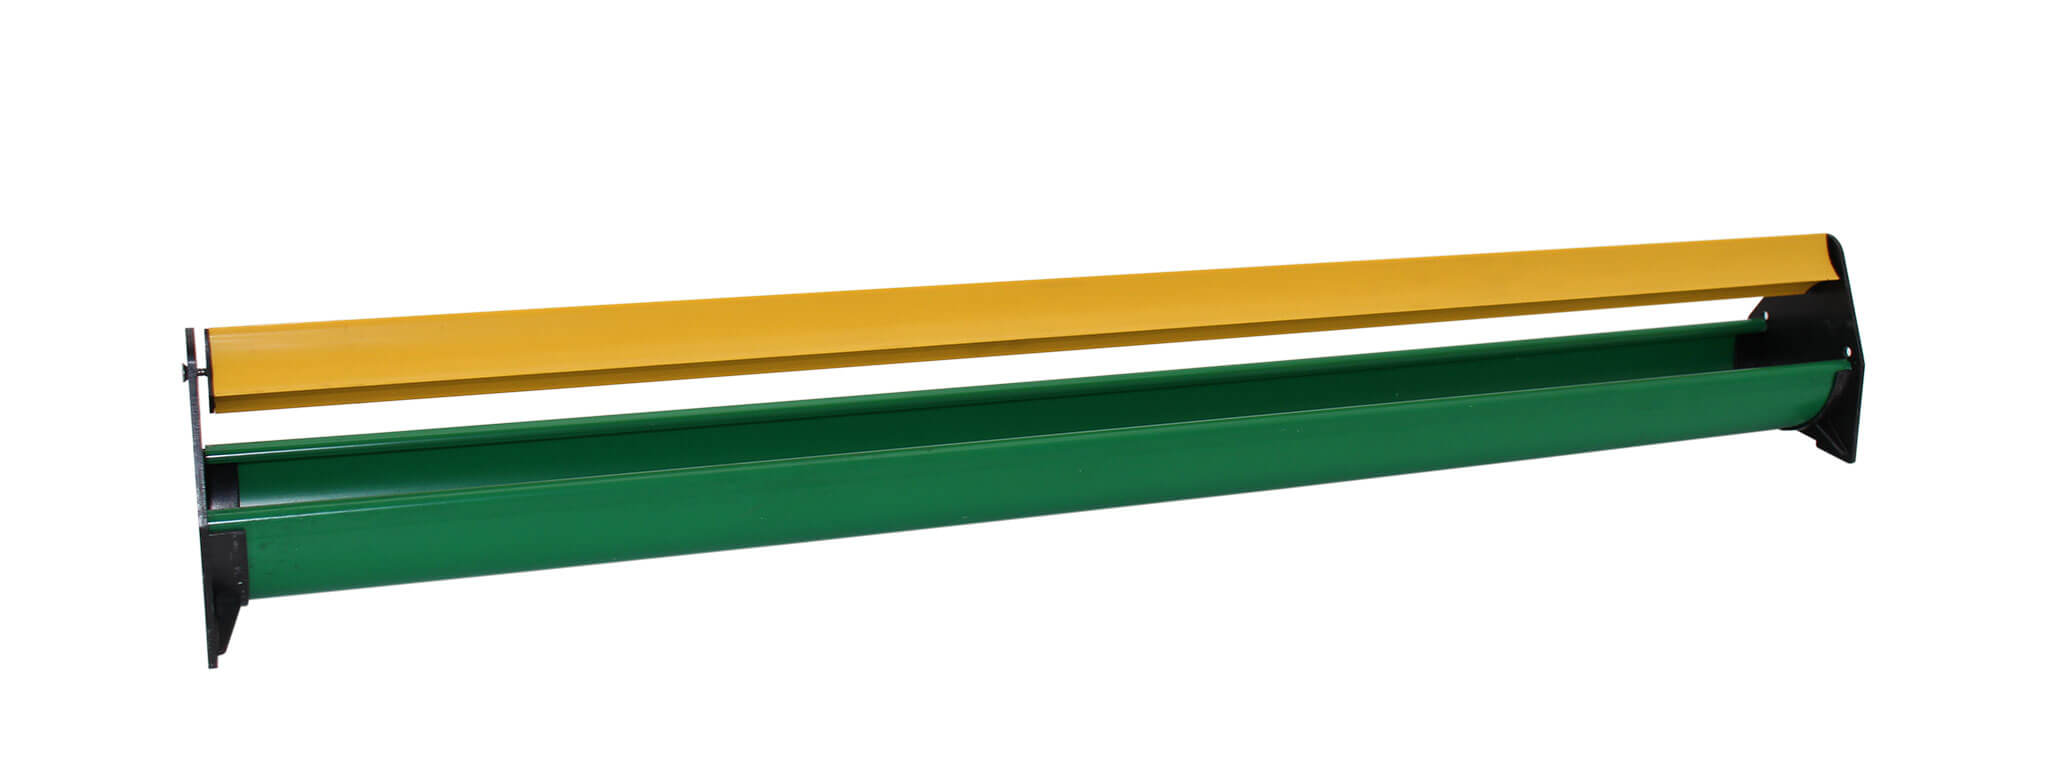 Troughs with Roll Bar, plastic, FS-Quality (3 Sizes, 4 Lengths)